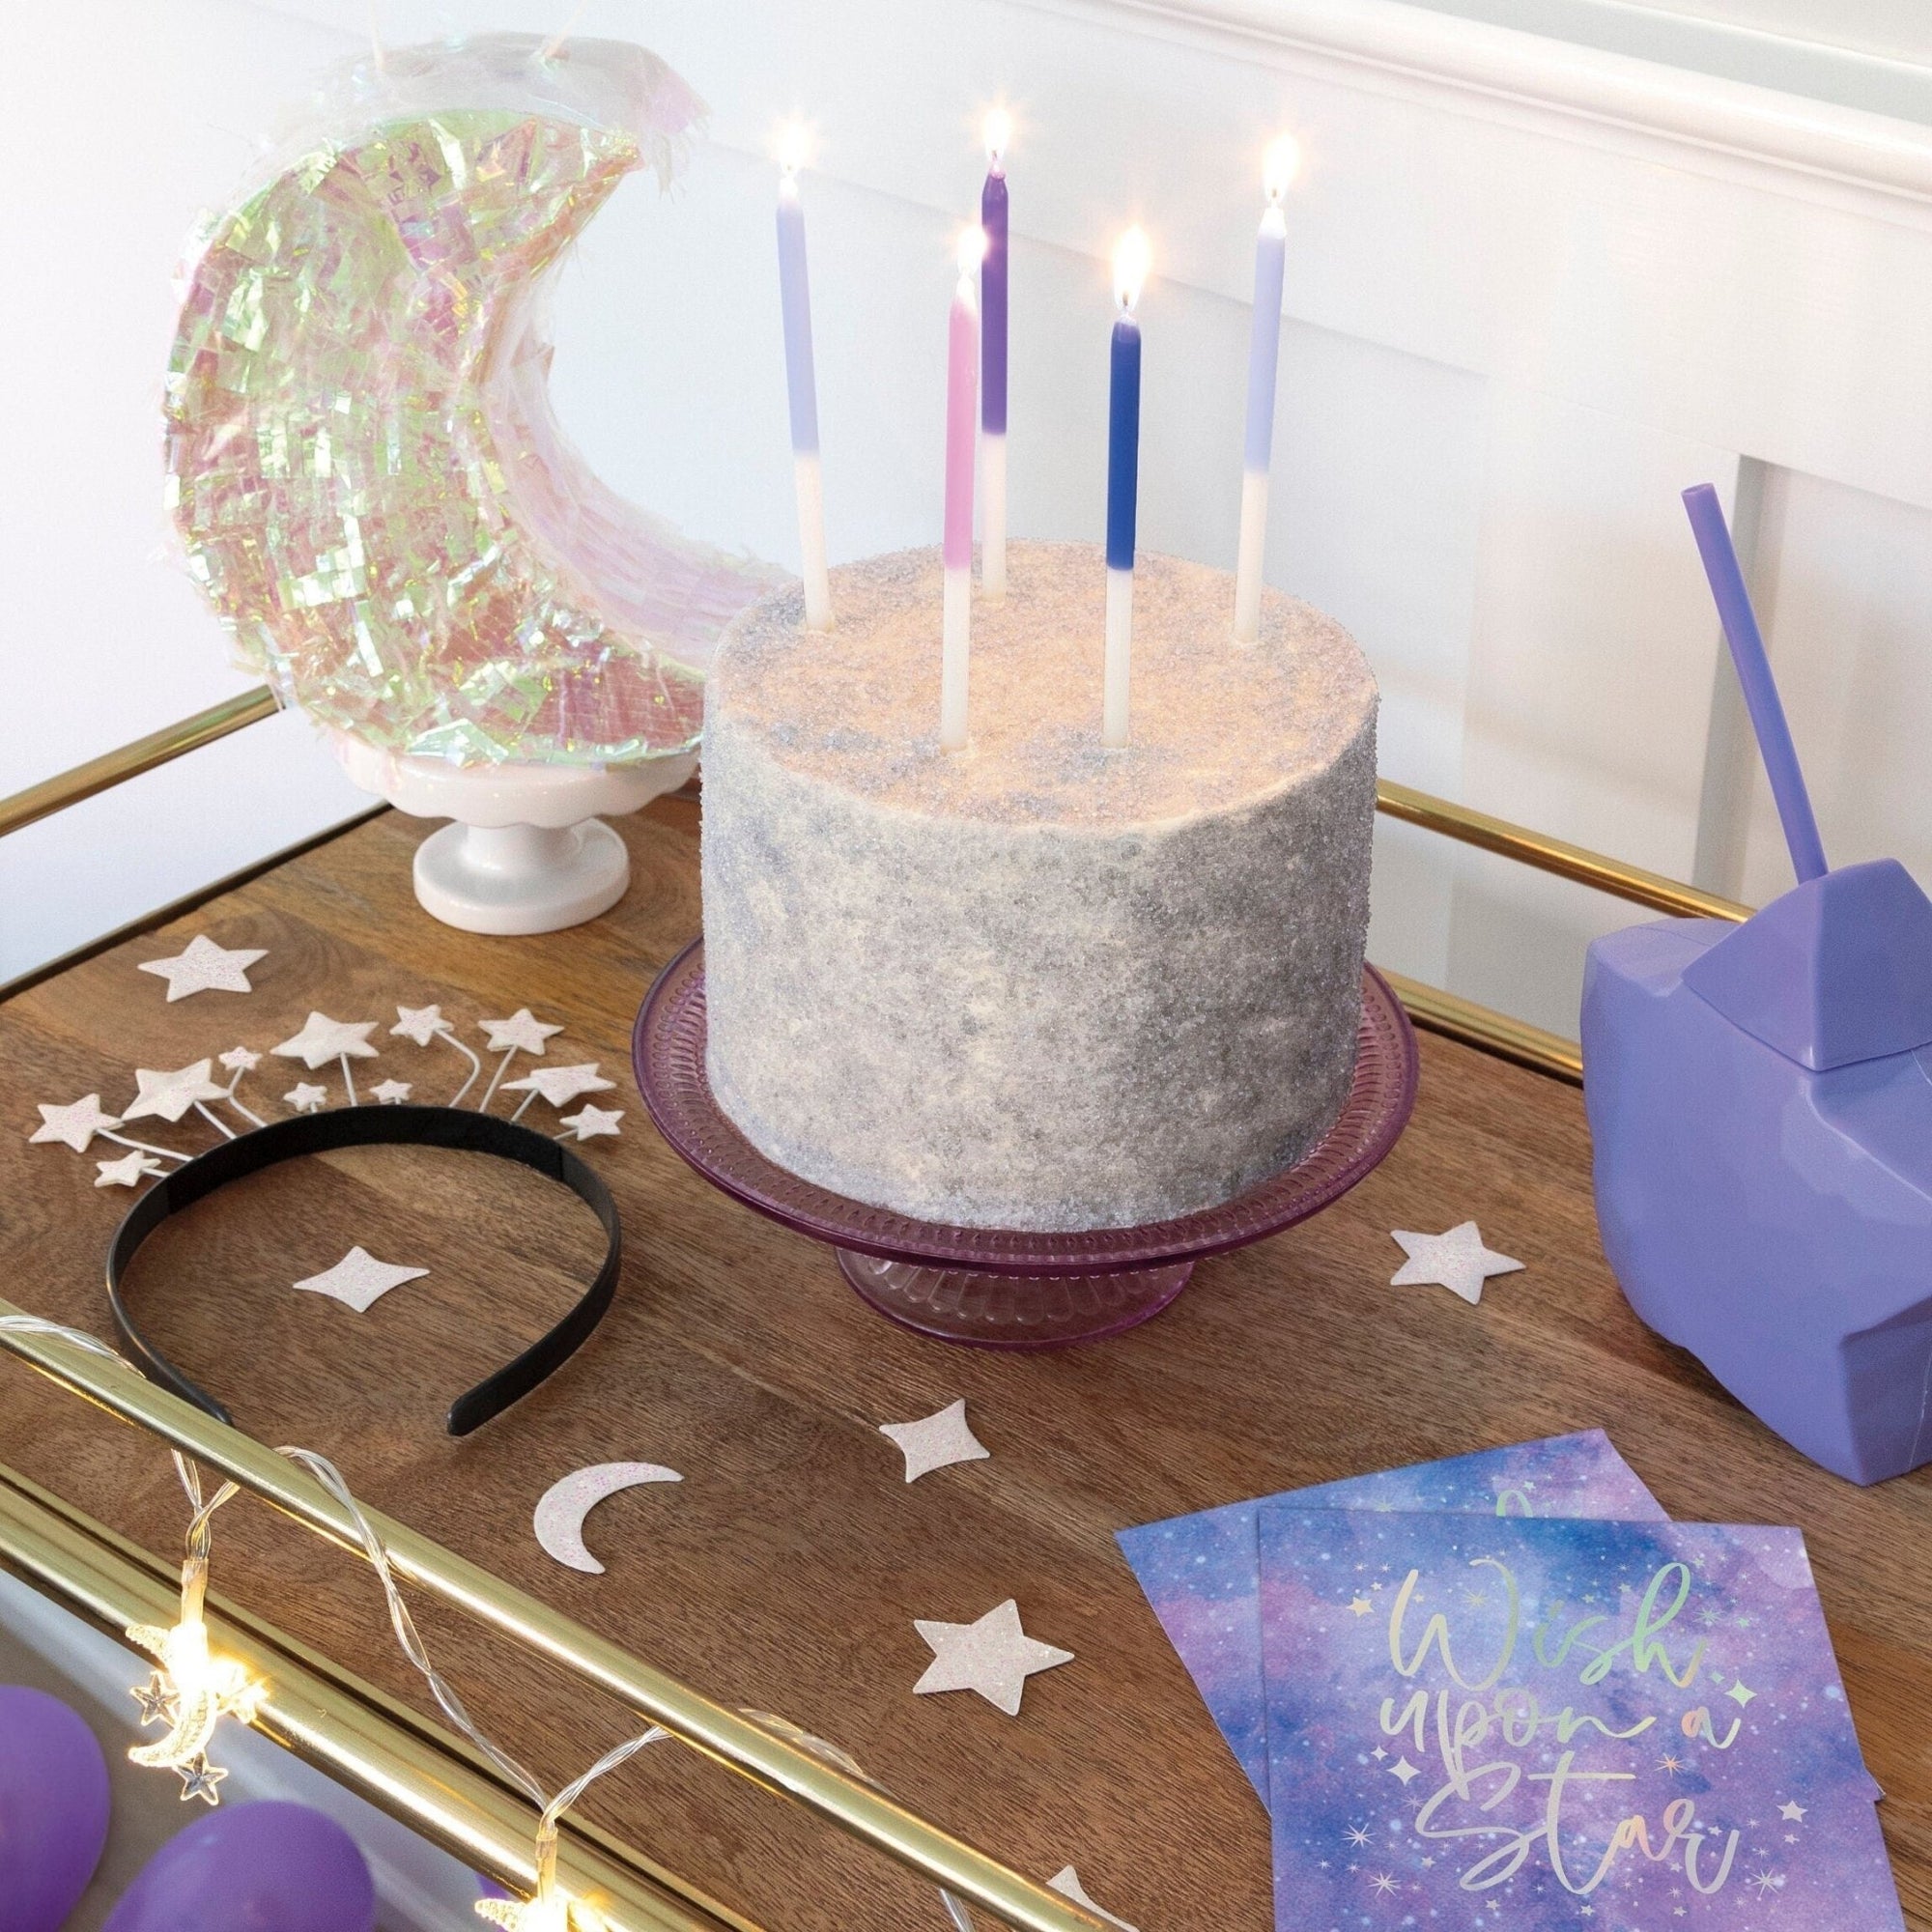 12 Galaxy Party Cake Candles - Stesha Party